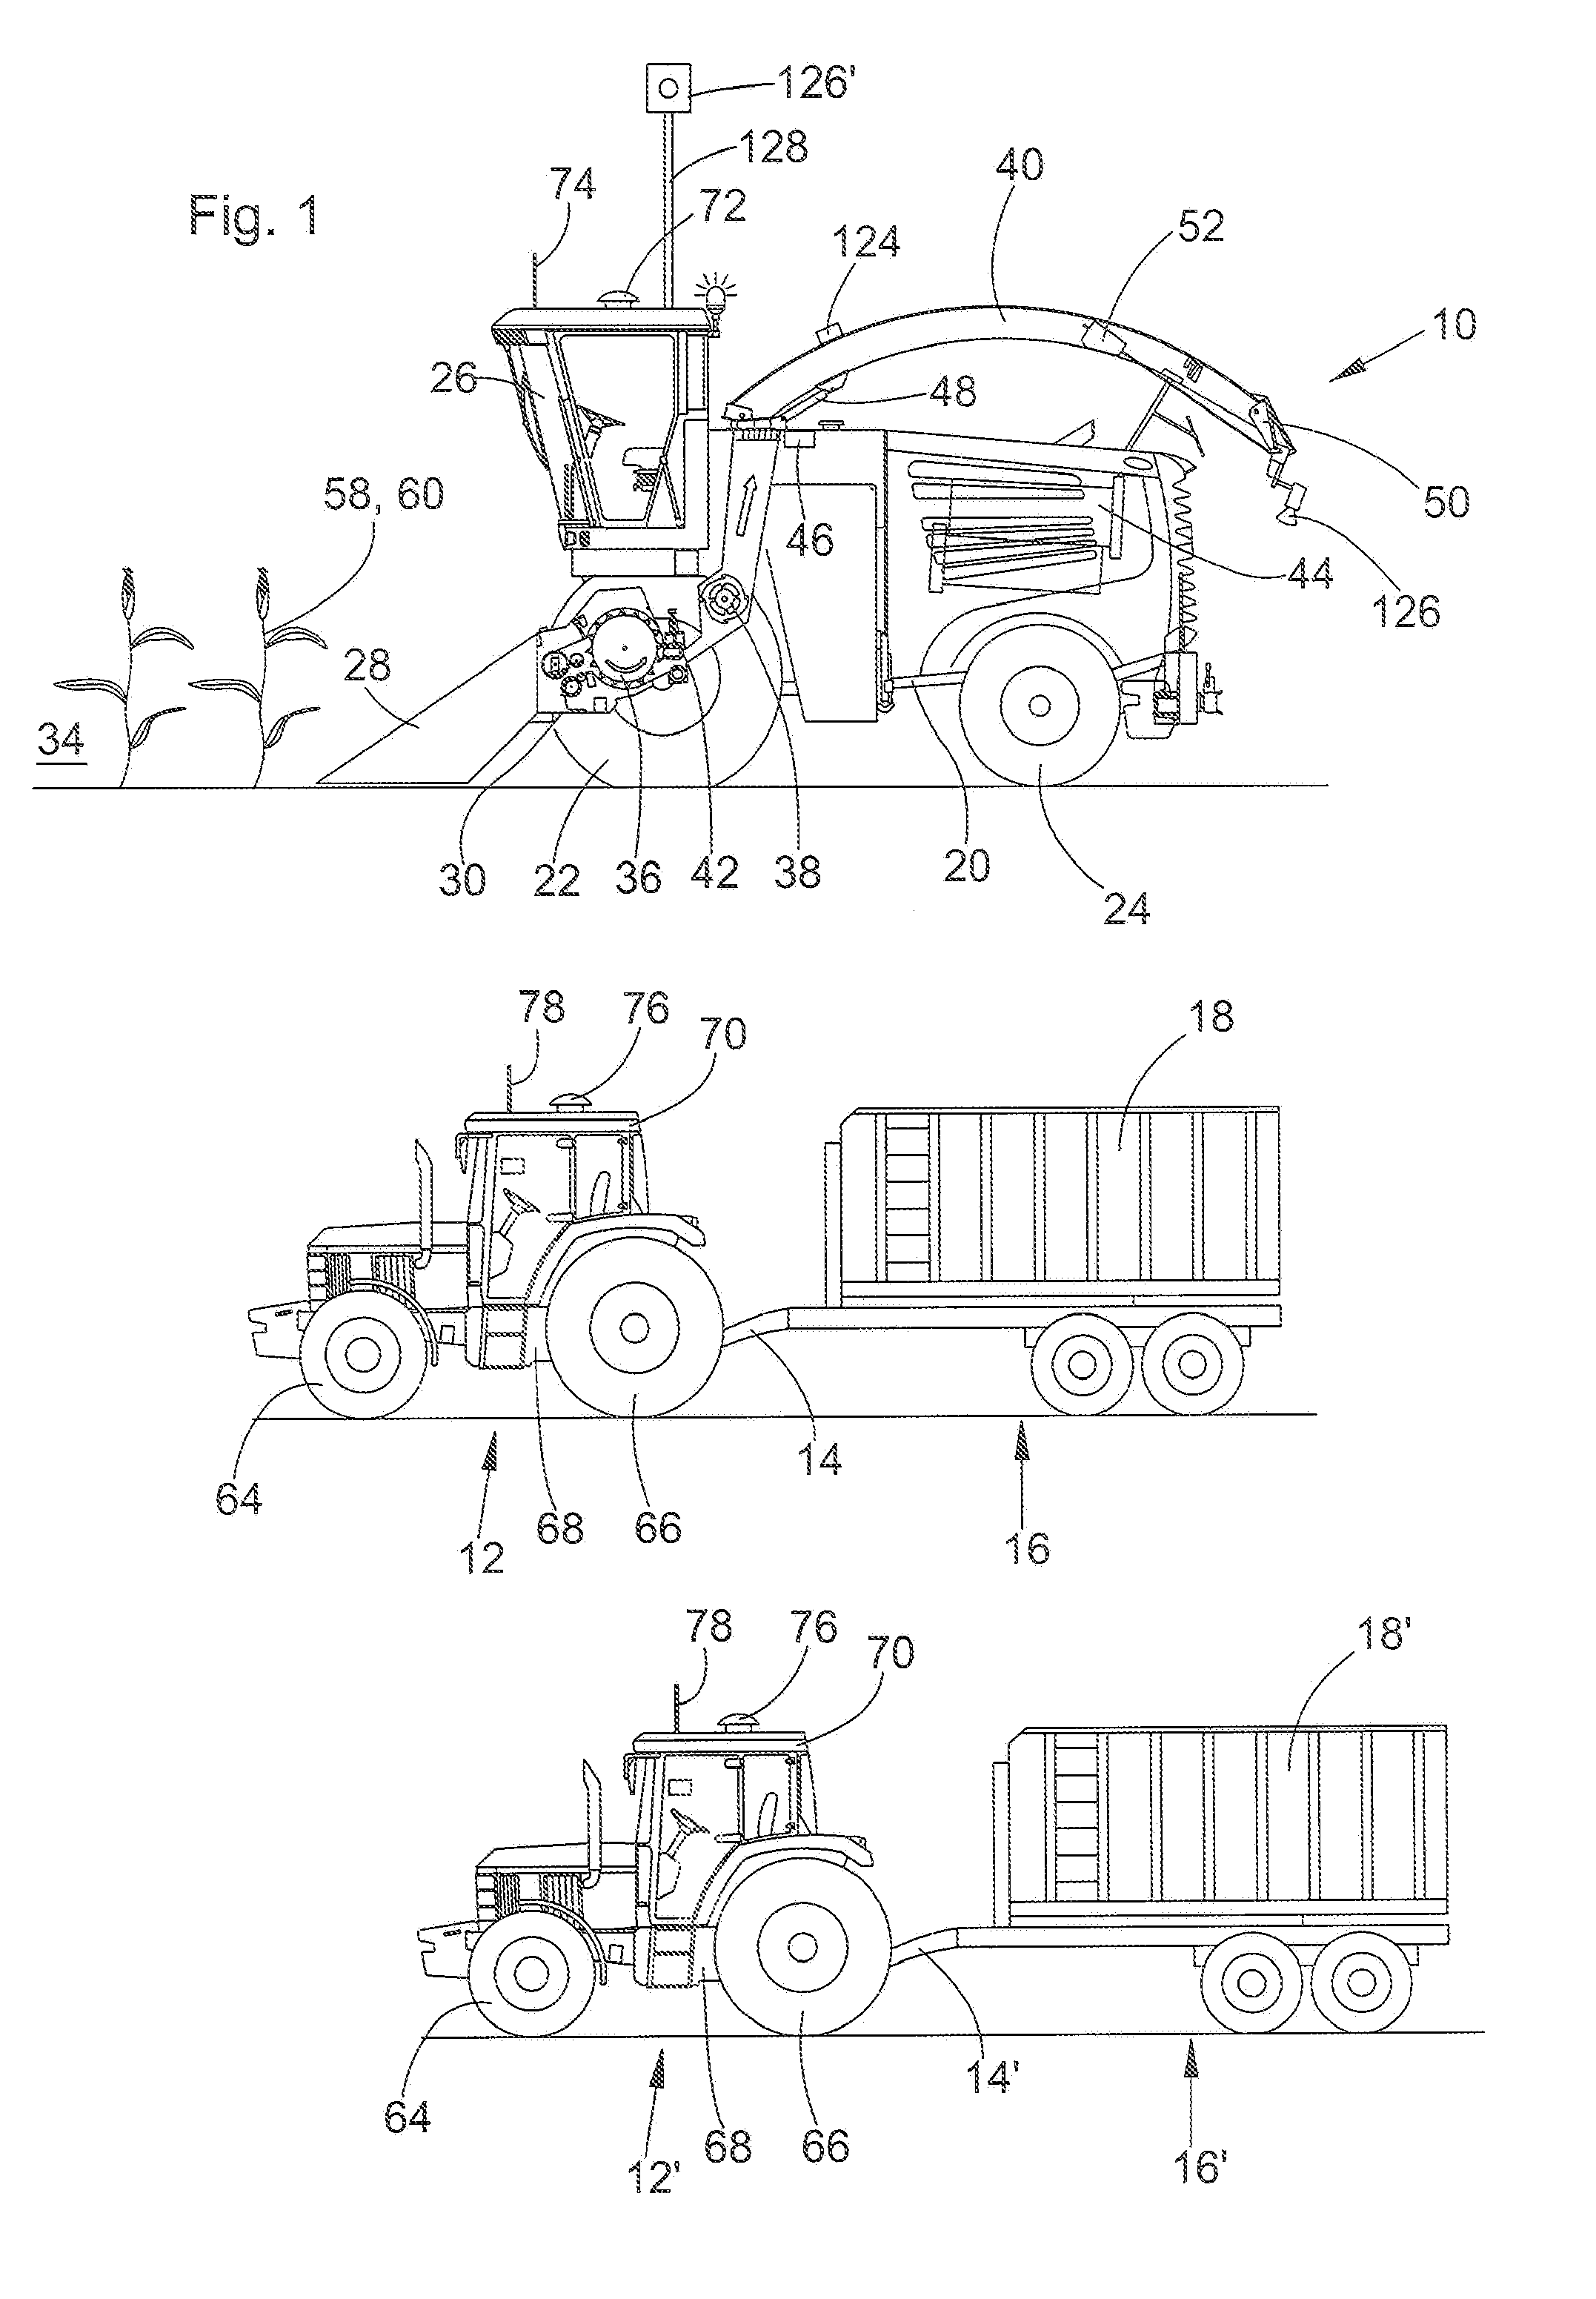 Control Arrangement For Controlling The Transfer Of Agricultural Crop From A Harvesting Machine To A Transport Vehicle